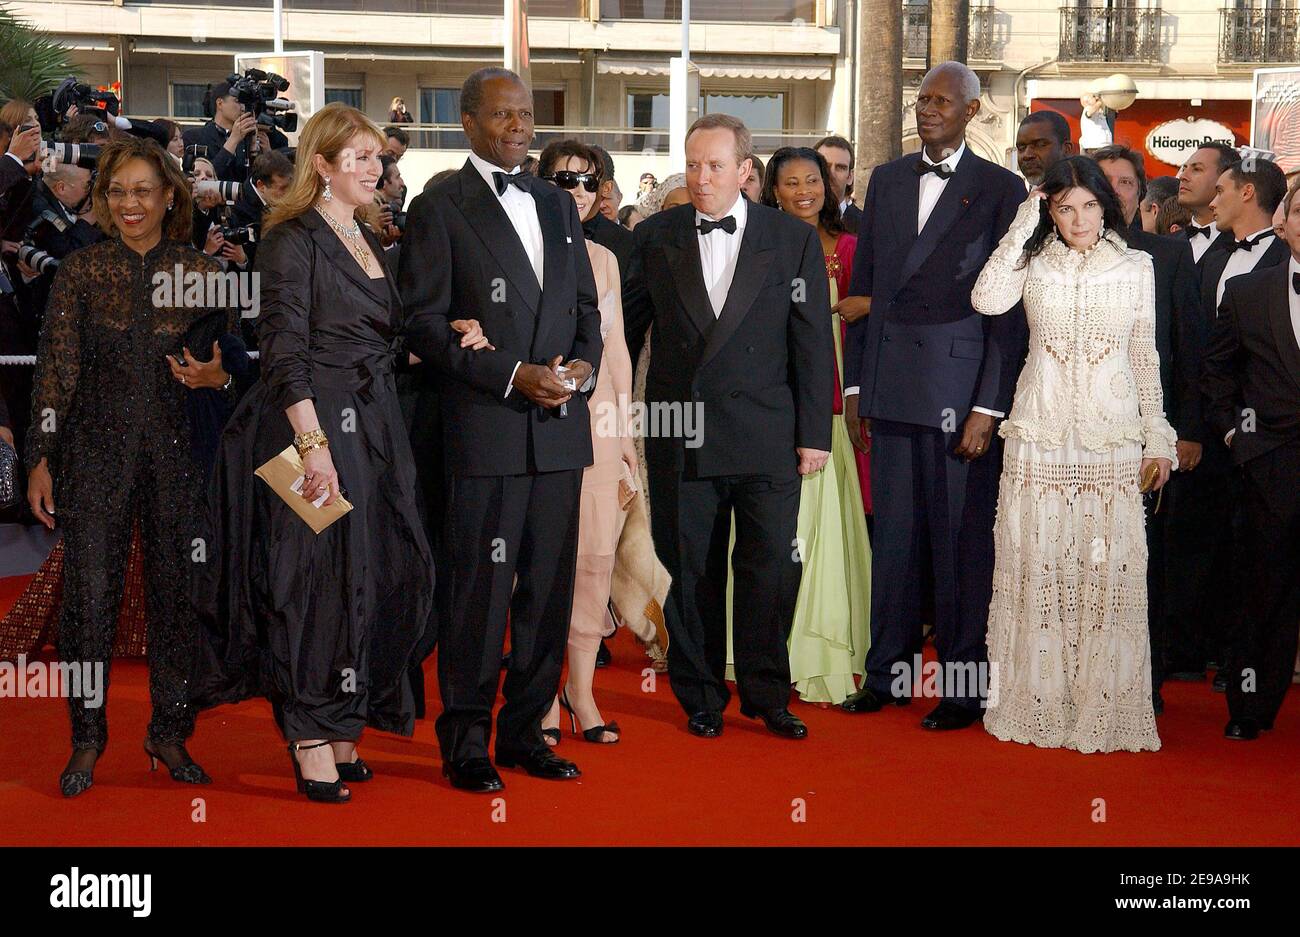 U.S. actor Sidney Poitier (2nd left), flanked by his wife Joanna Shimkus (L) and French actress Juliette Binoche, with French Culture Minister Renaud Donnedieu de Vabres, former Senegalese President Abdou Diouf and Carole Laure arrive for the screening of US director Ron Howard's film 'Da Vinci Code', opening the 59th International Cannes Film Festival, in Cannes, Southern France, on May 17, 2006. Photo by Hahn-Nebinger-Orban/ABACAPRESS.COM Stock Photo